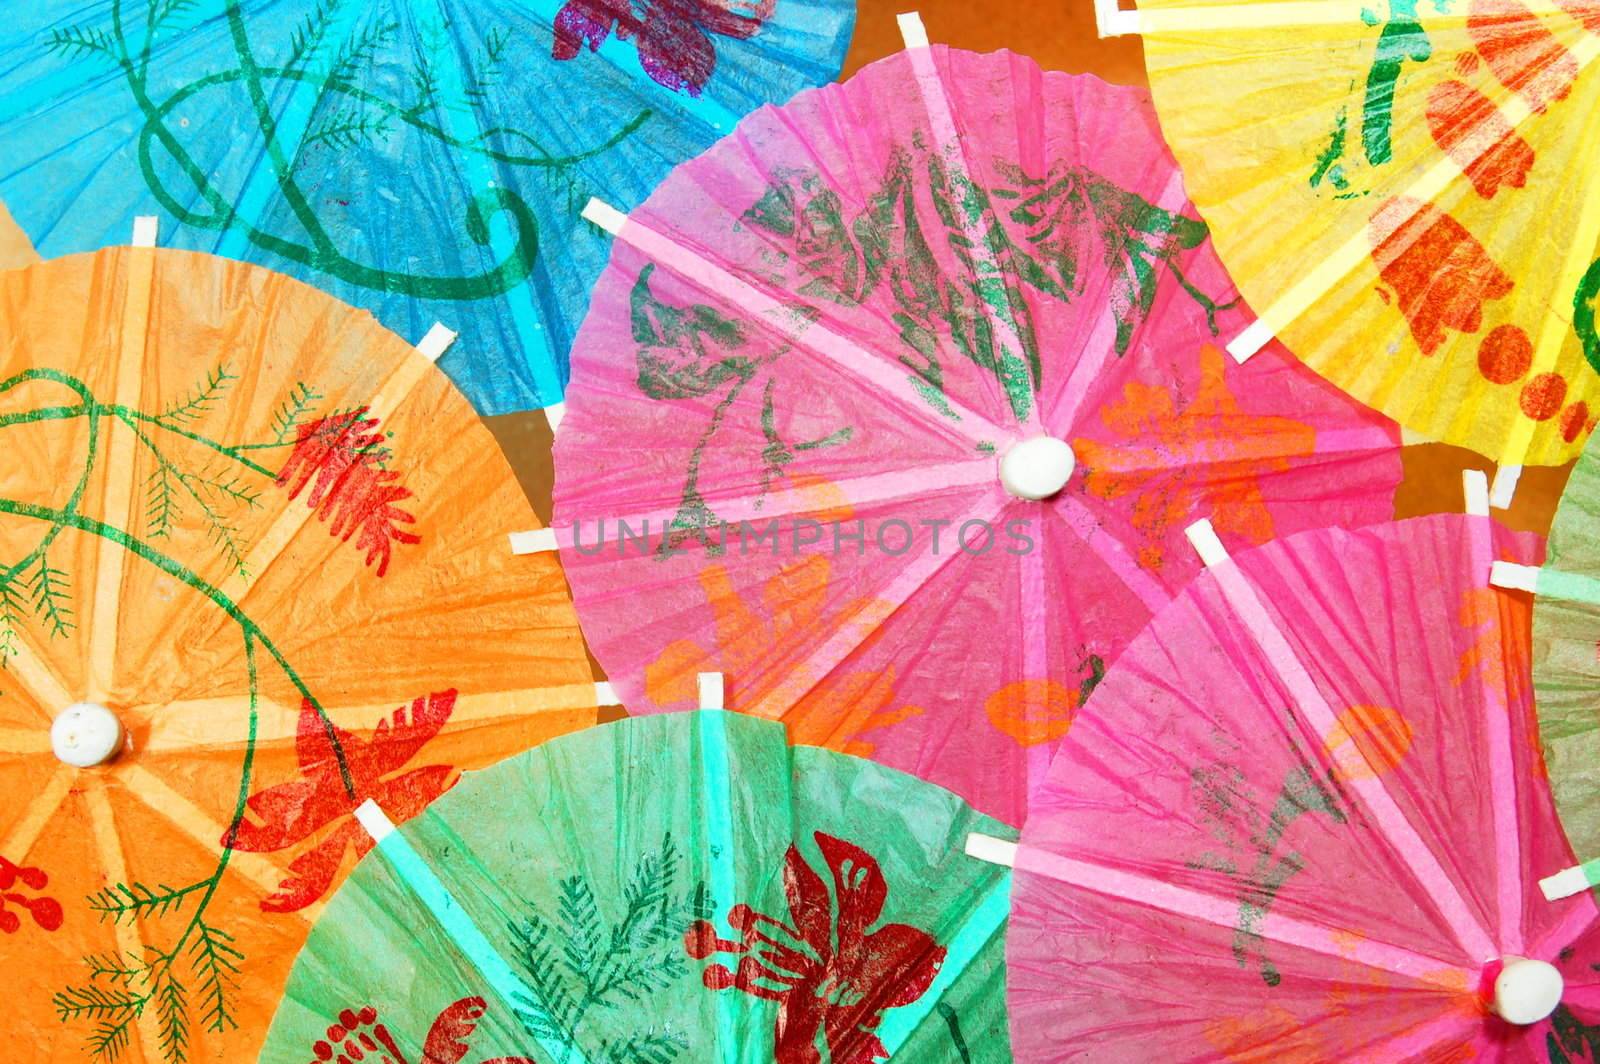 party background with cocktail umbrella and copyspace